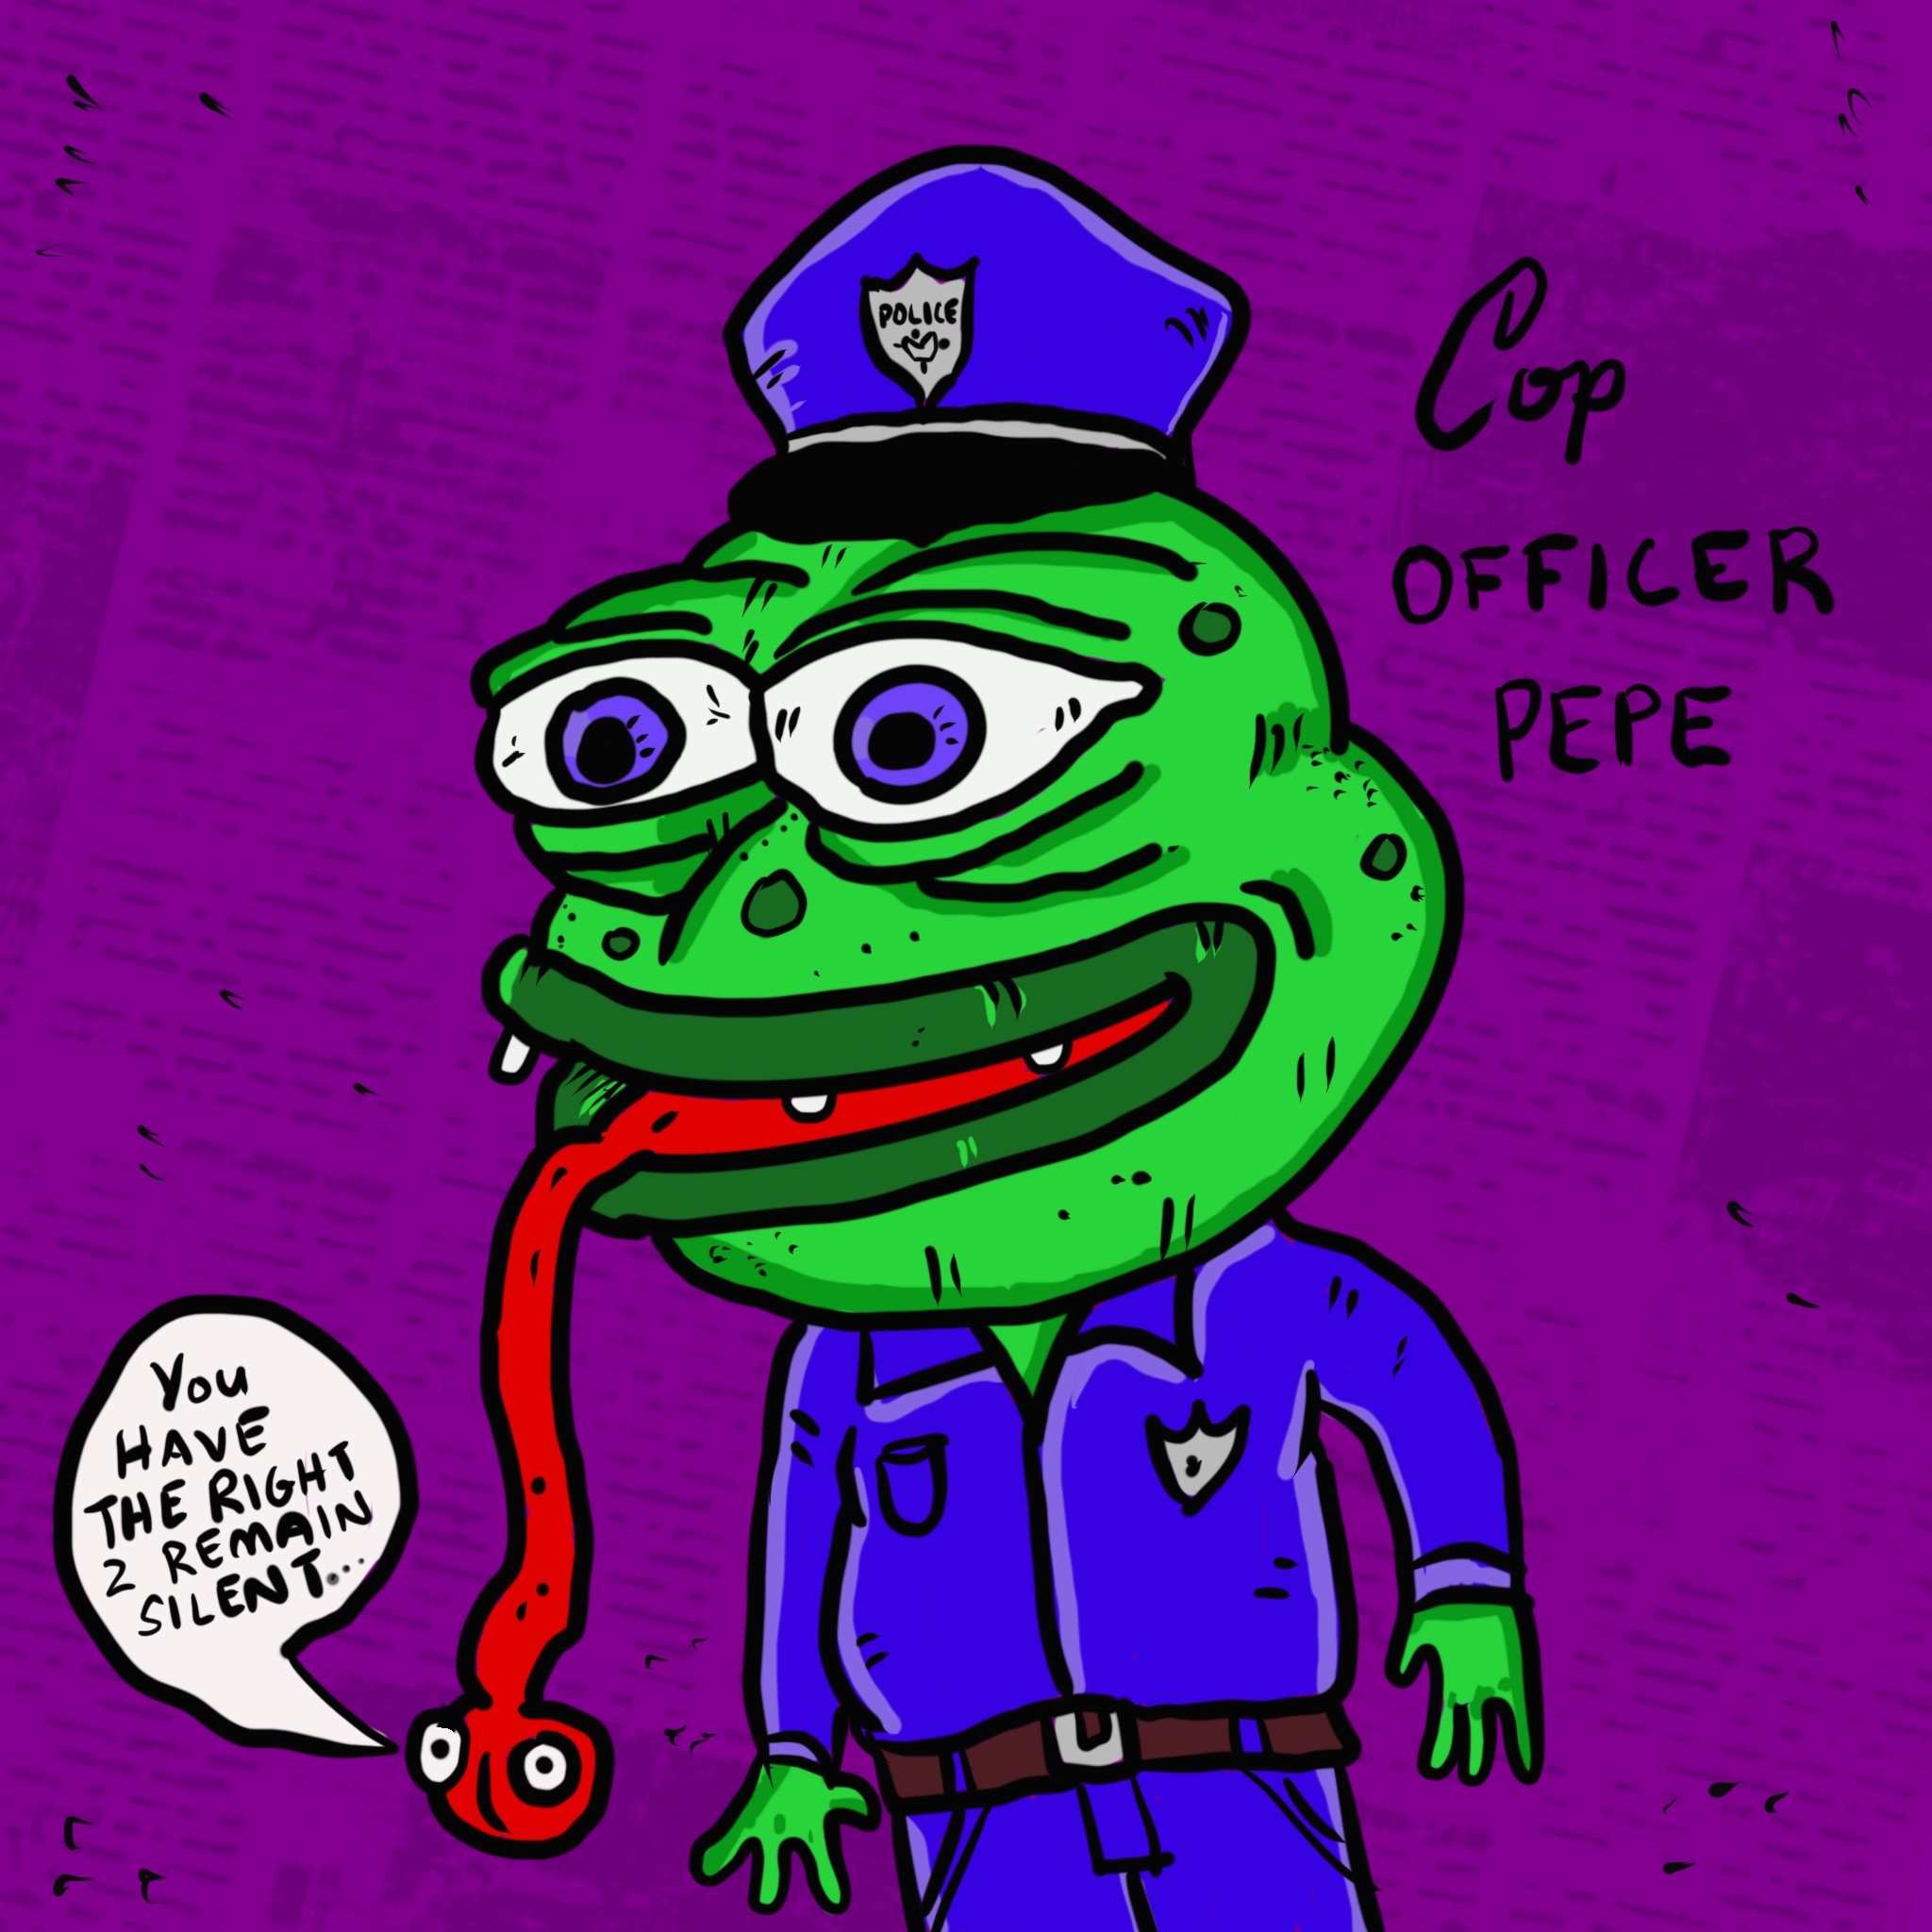 Officer Pepe (Cop)